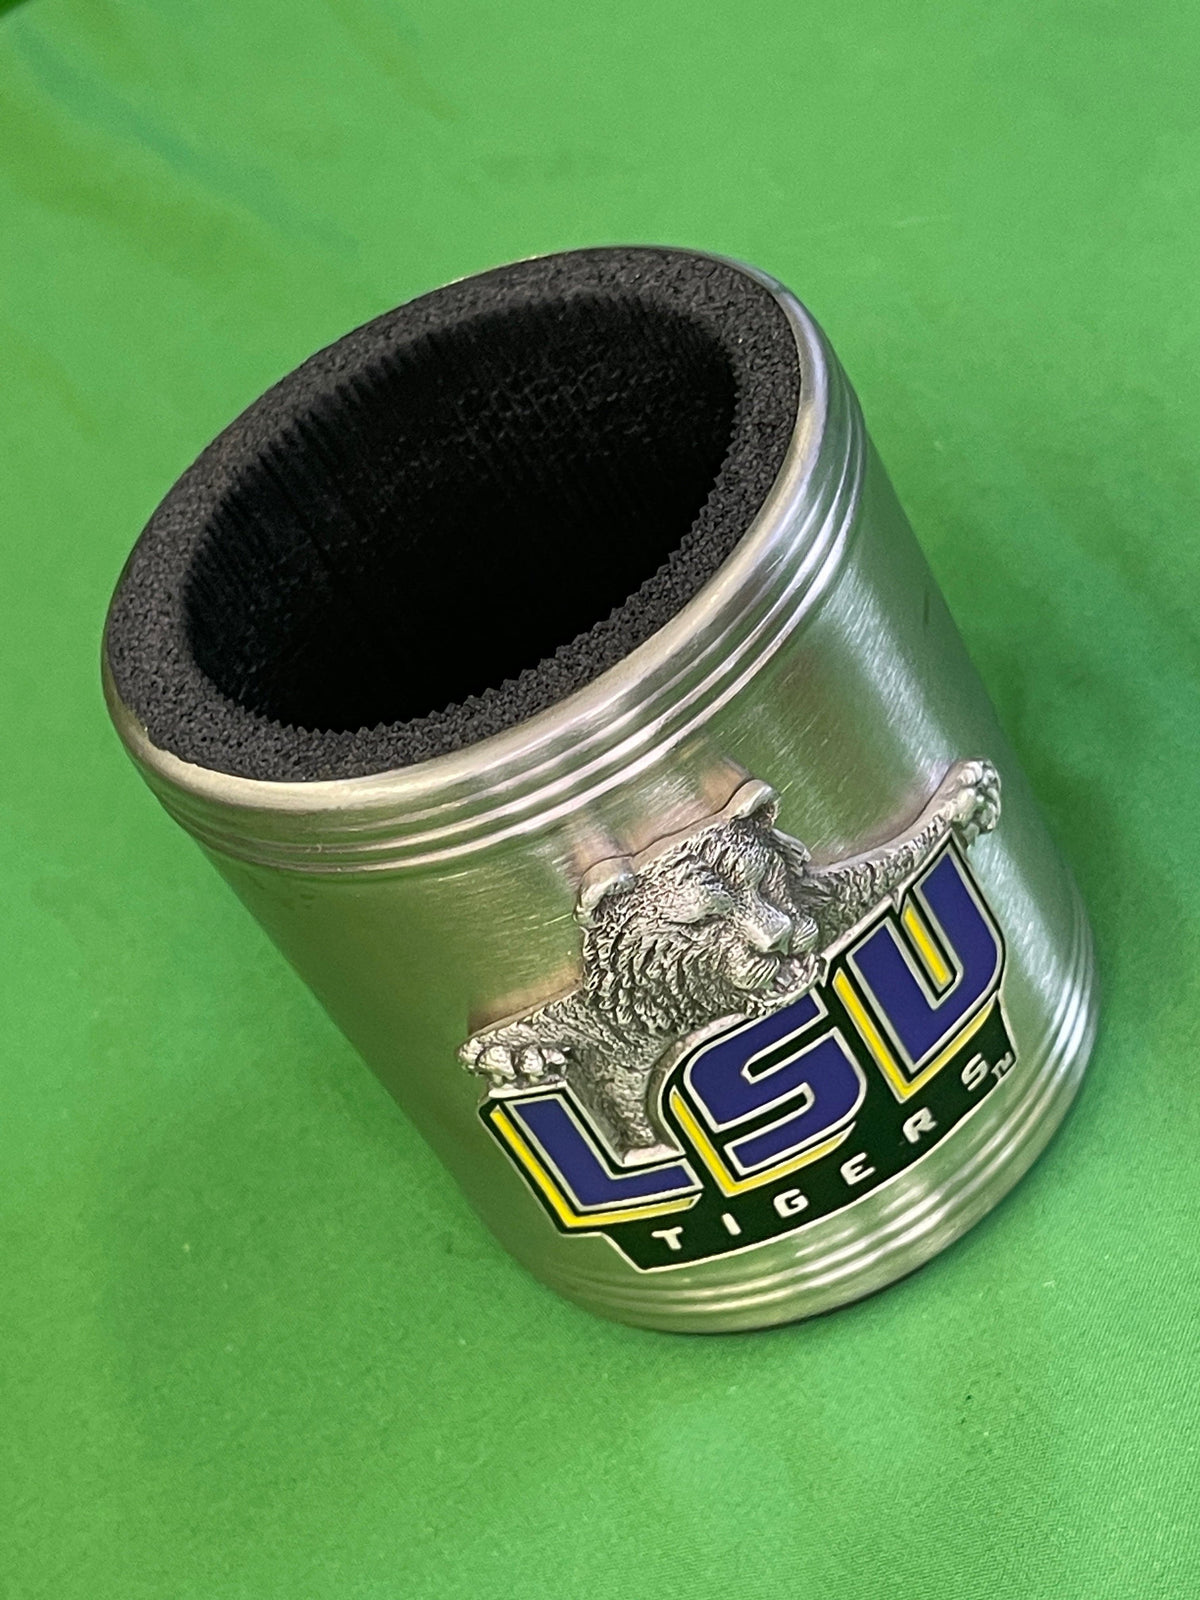 NCAA Louisiana State LSU Tigers Stainless Steel Can Cooler/Cosy